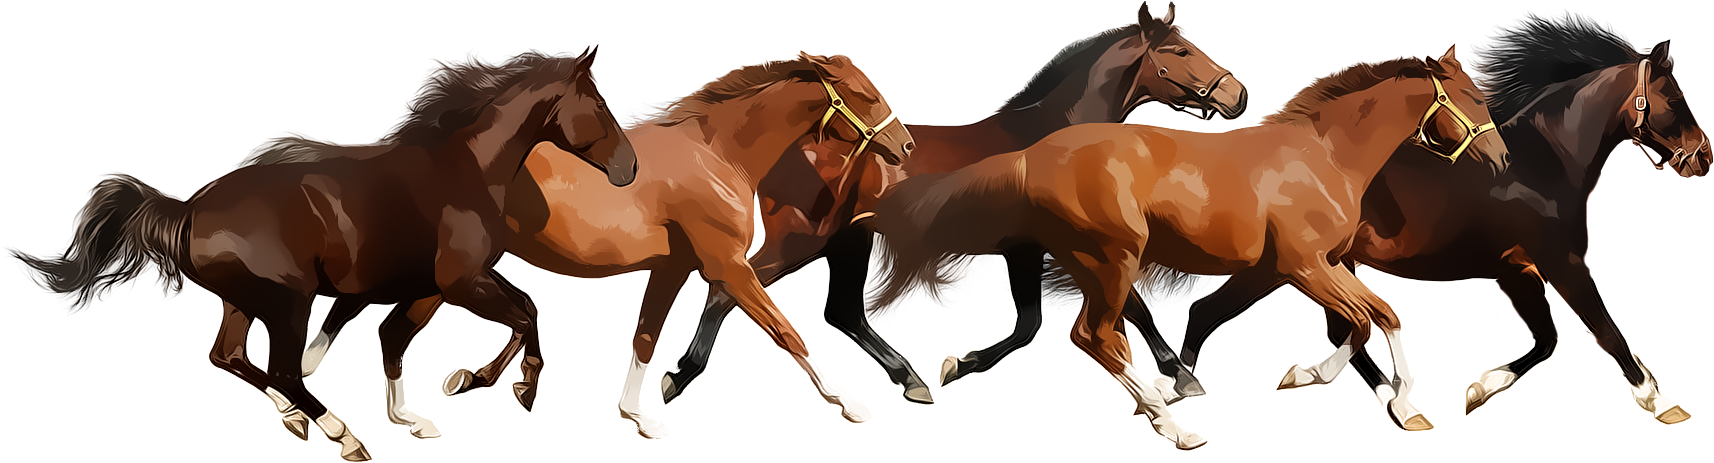 American Running Horse PNG Image Background